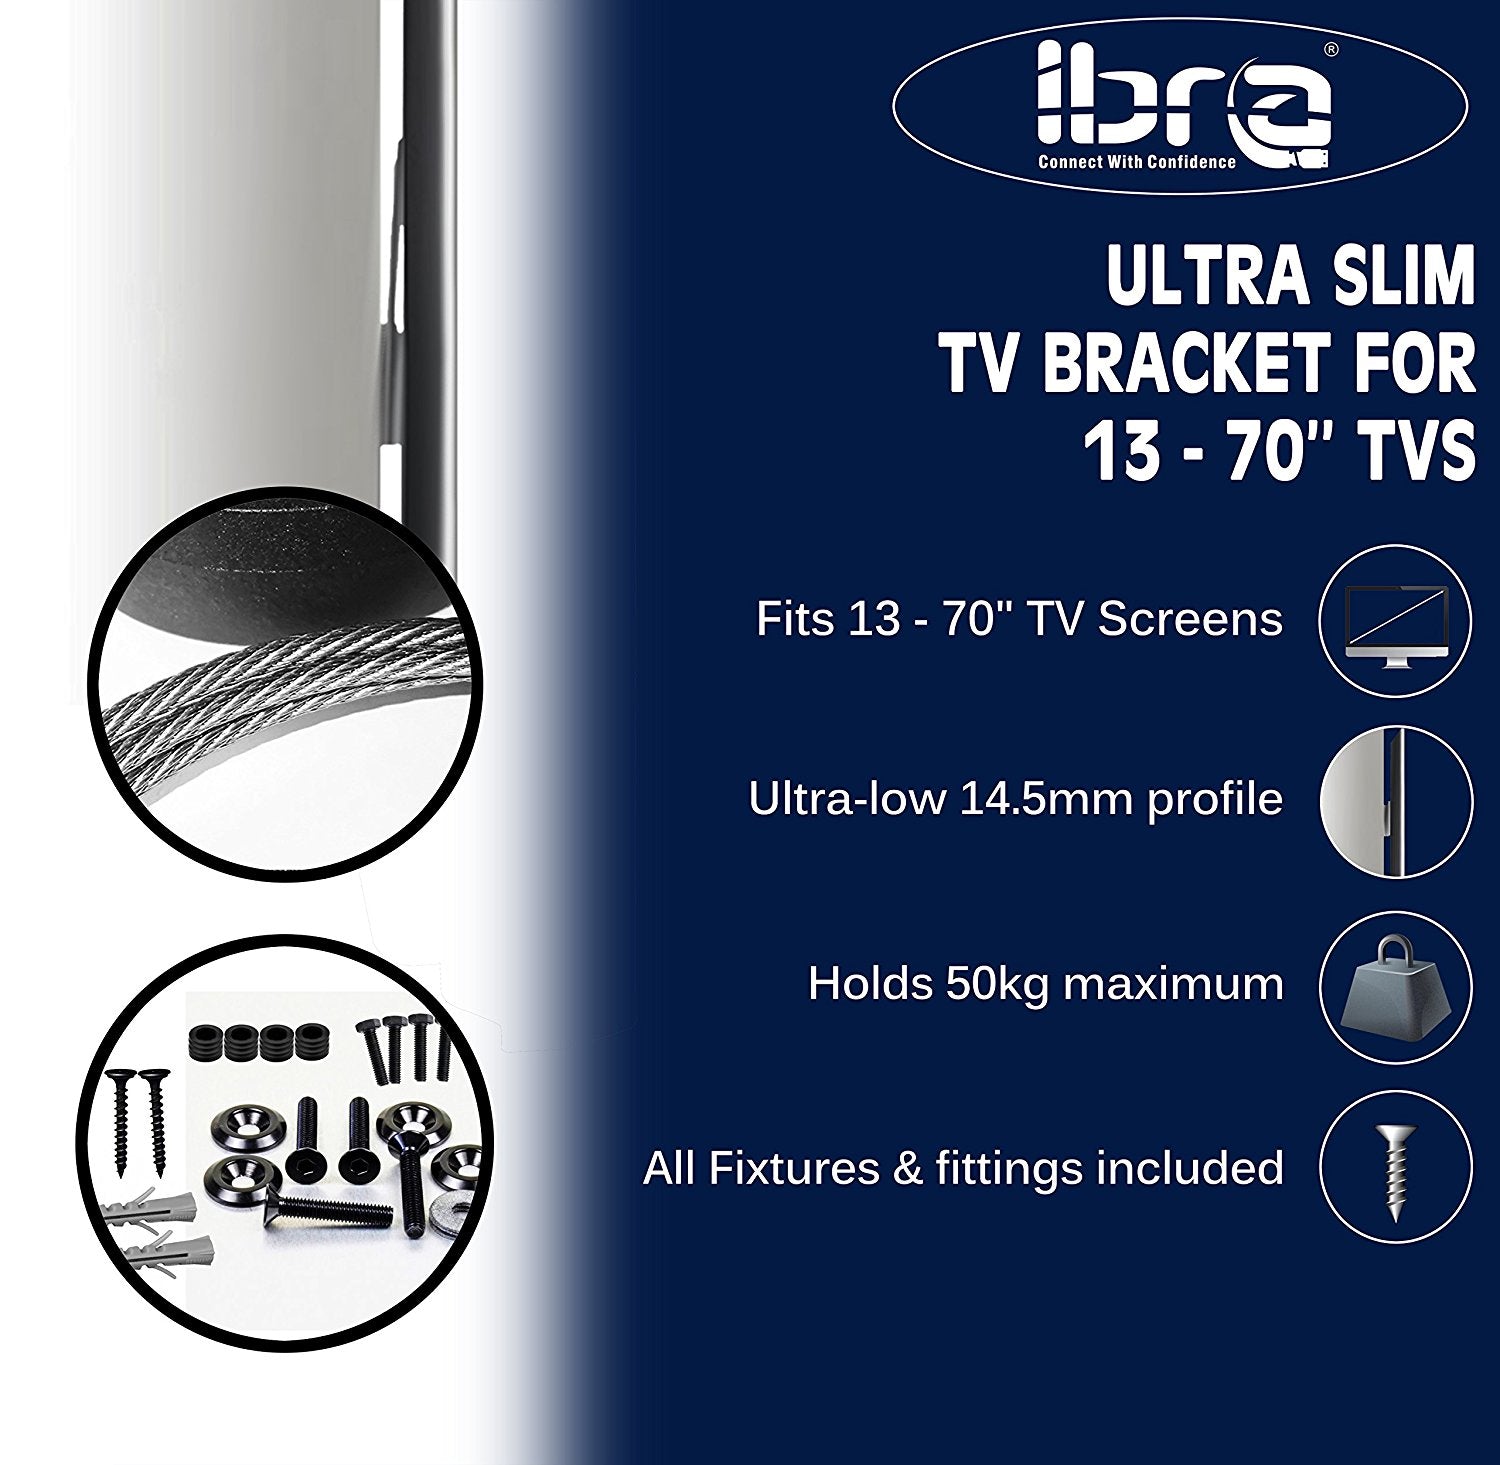 IBRA Ultra Slim Wall Mount Bracket System for Samsung, LG and Philips LED TV. Fits most 13" to 70" Screens